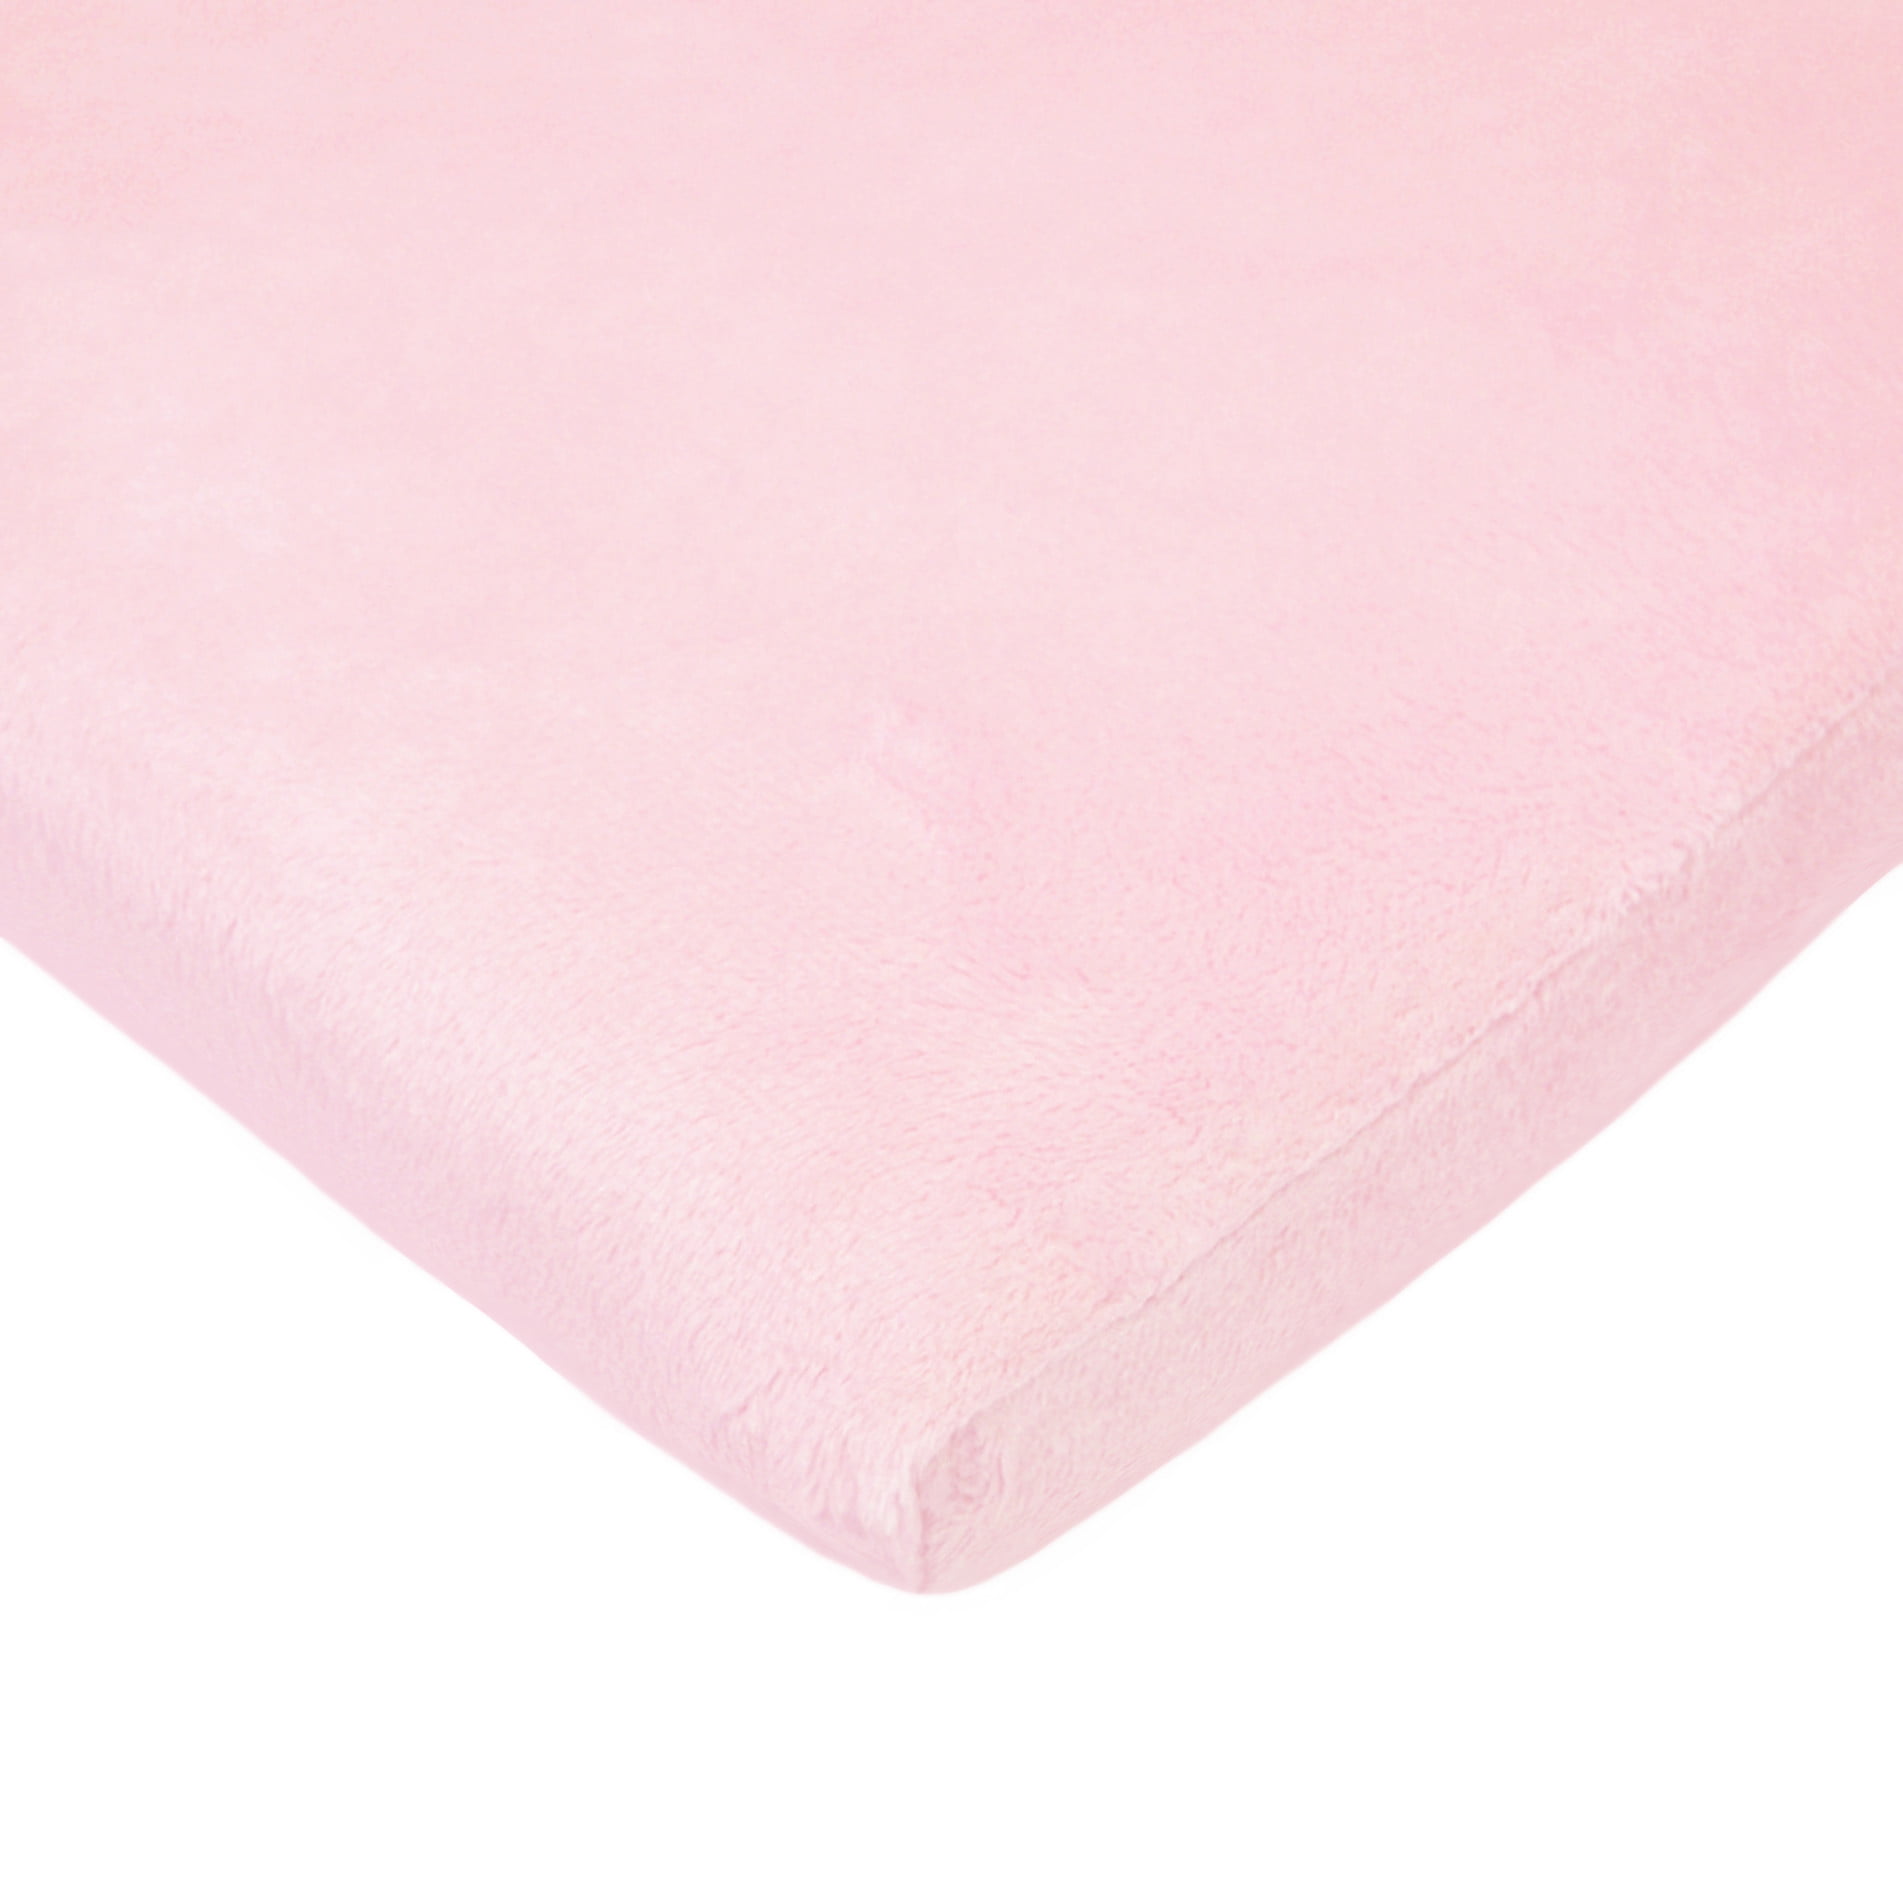 Ecru TL Care Supreme 100% Natural Cotton Jersey Knit Fitted Cradle Sheet for Boys and Girls Soft Breathable